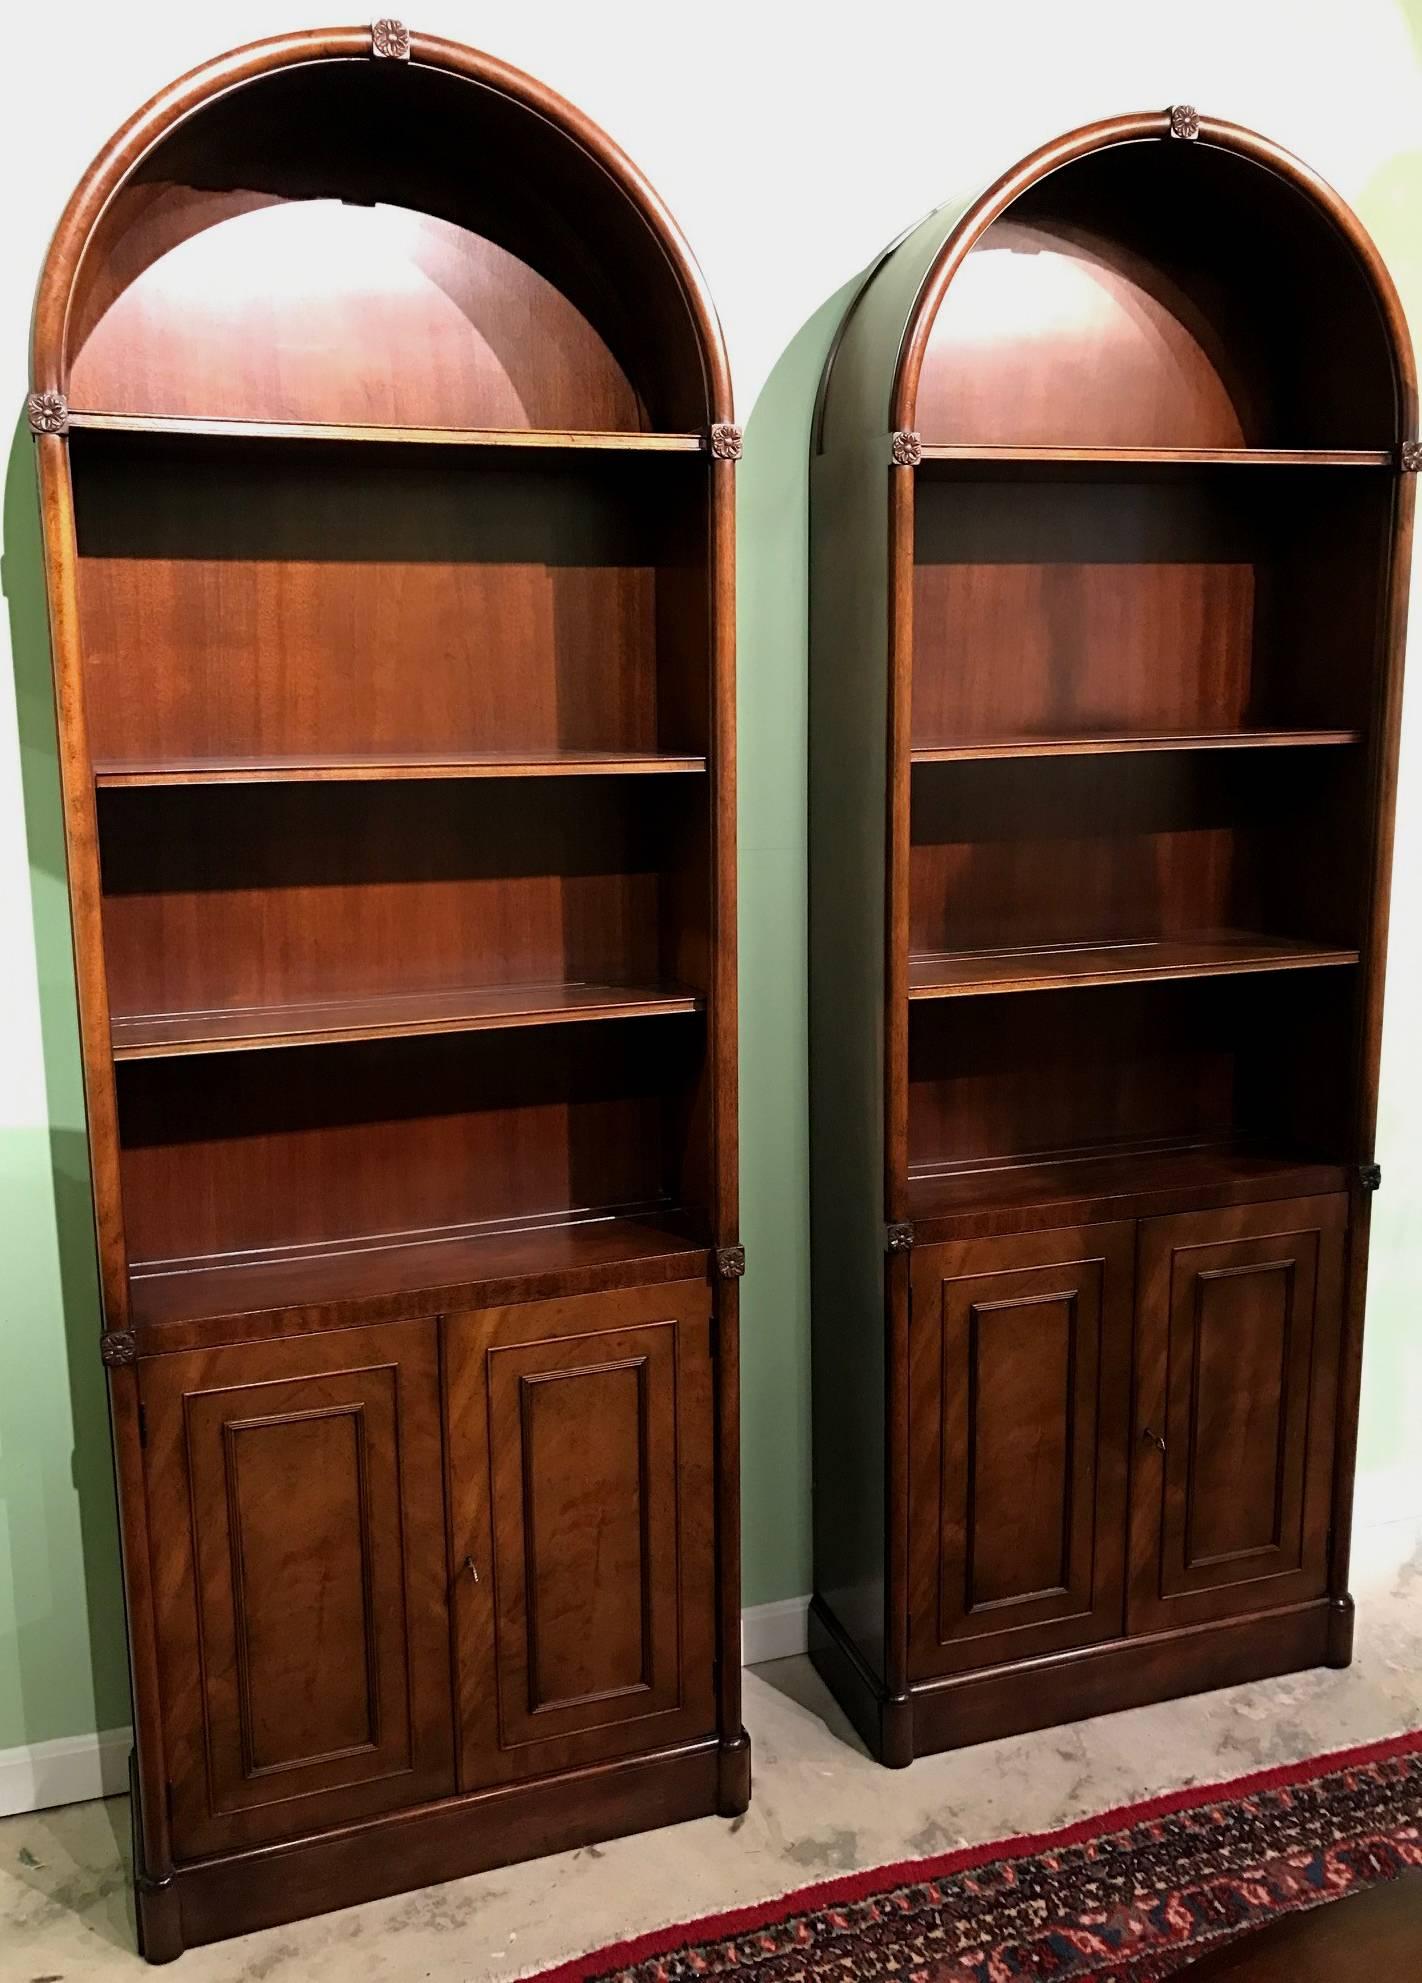 A fine pair of arched mahogany bookcases or china cabinets, from the Kaplan Furniture Beacon Hill Collection, each with one permanent and two adjustable shelves surmounting two doors, which open to reveal one adjustable interior shelf. The shelves